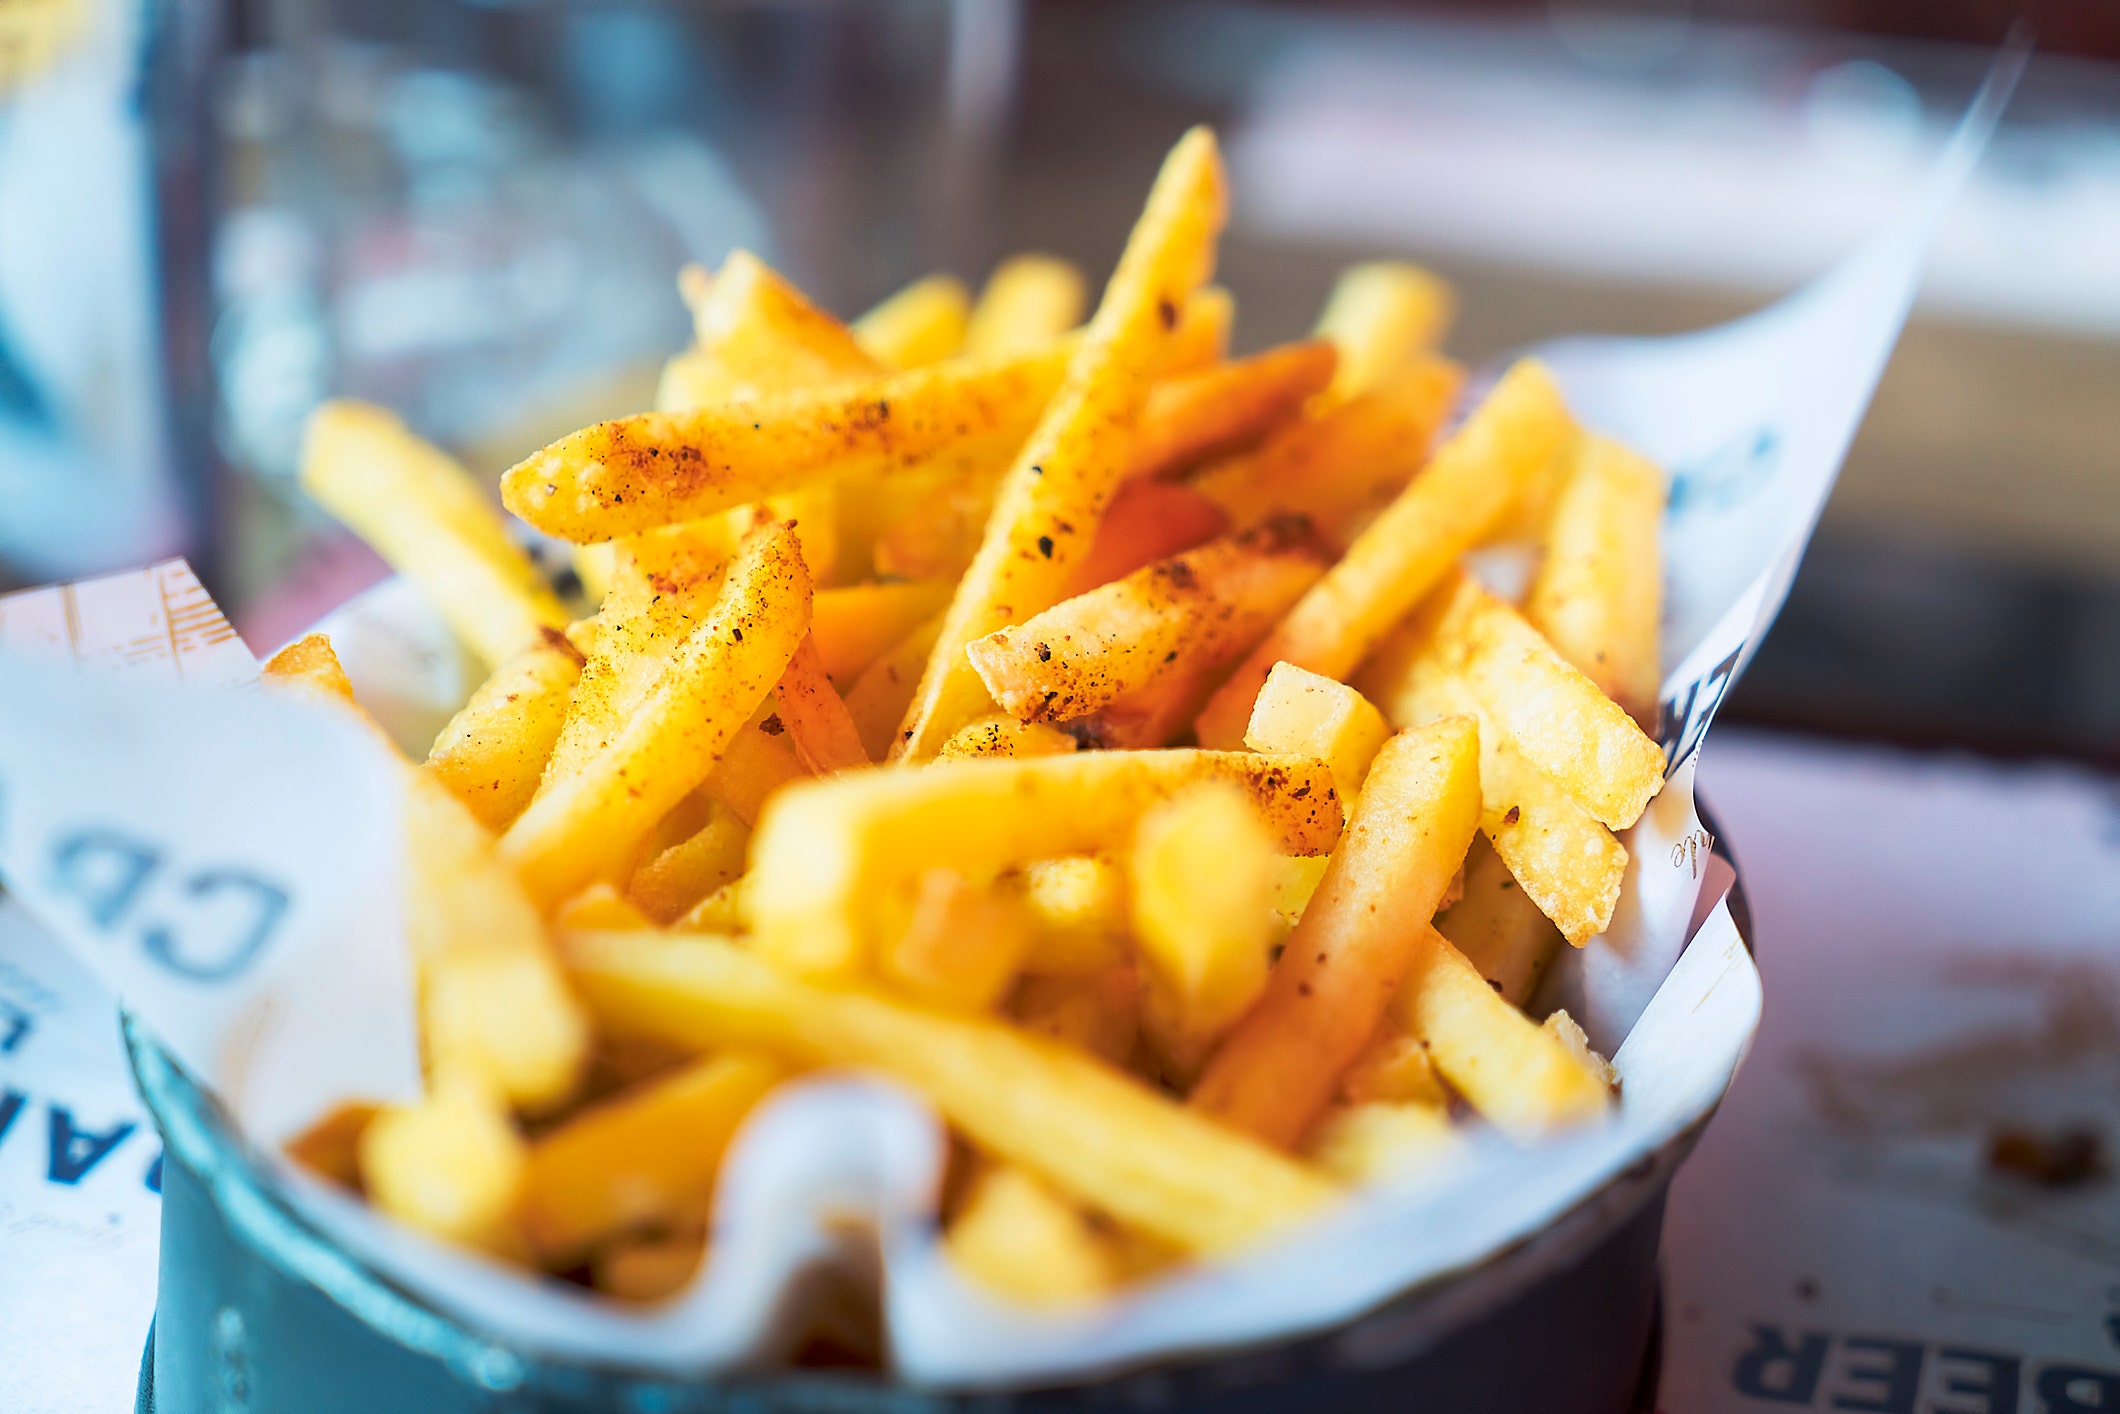 National French Fry Day: Fun facts on the crispy food that became an American staple